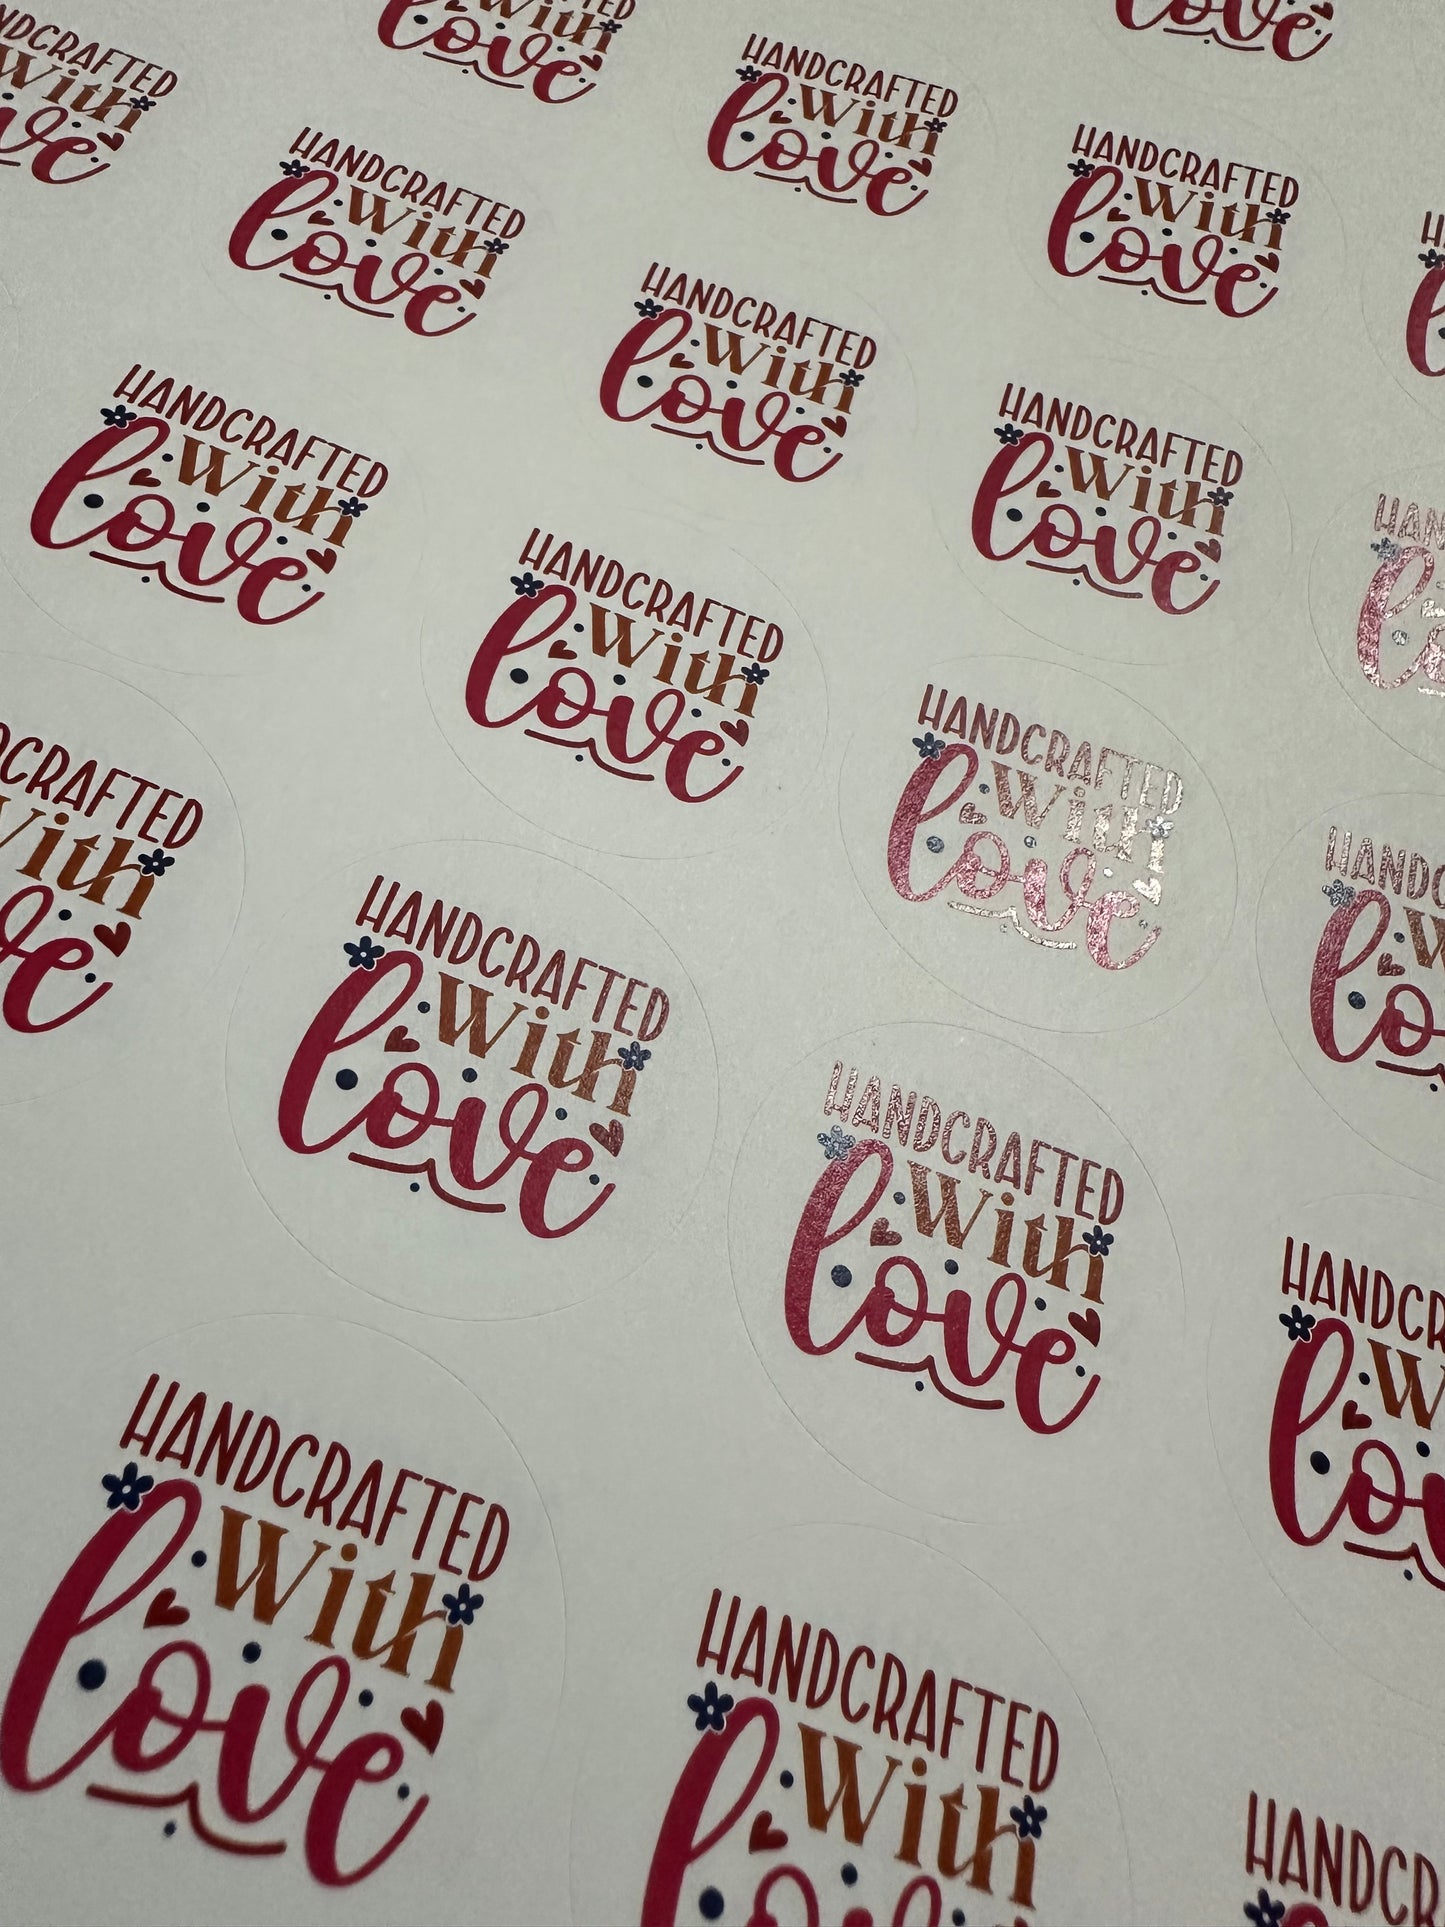 Handcrafted with Love Stickers